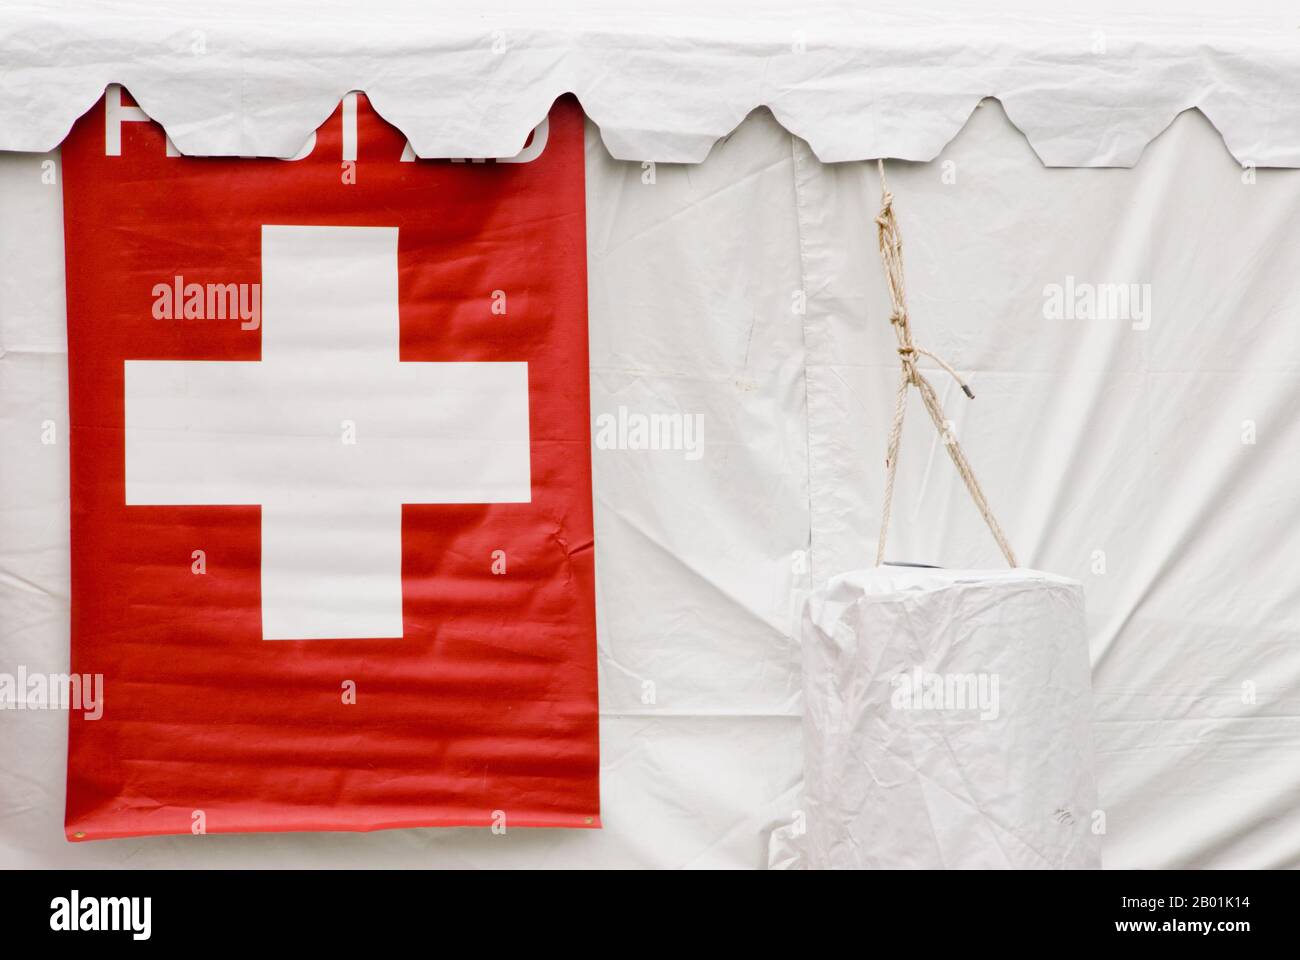 Outdoors public white colored first aid tent with a red cross on the side. Stock Photo